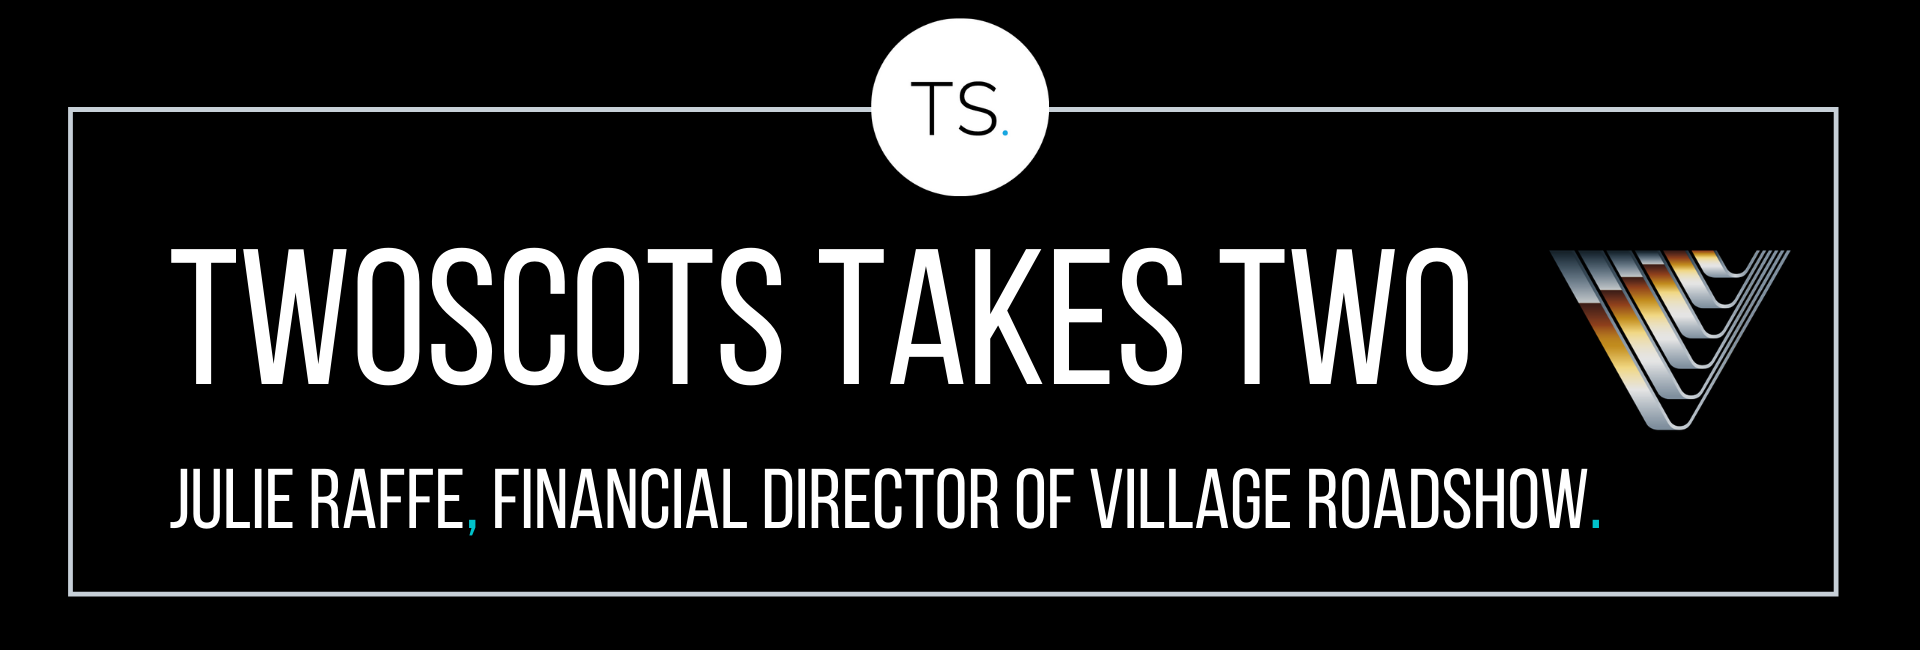 TwoScots Takes Two with Julie Raffe, Financial Director of Village Roadshow